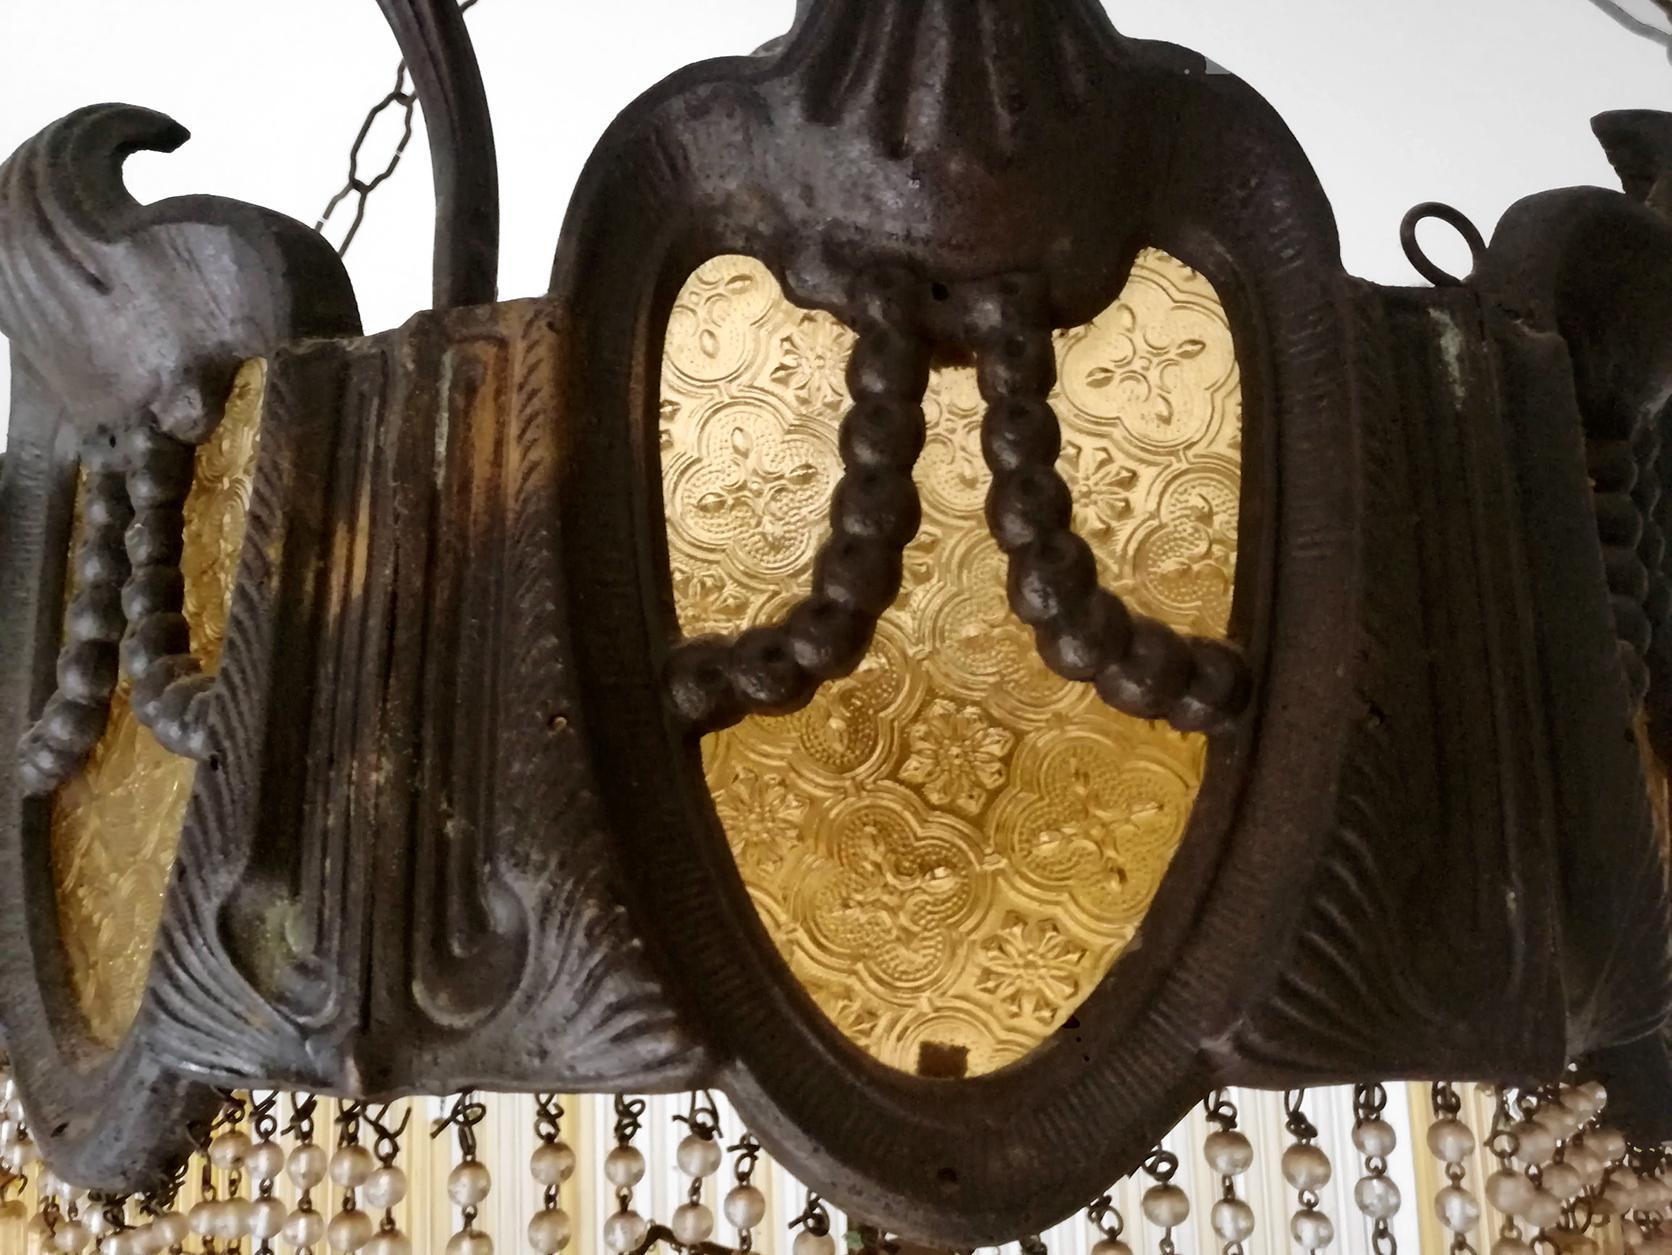 Large French Art Nouveau and Art Deco Amber Glass Straws Bronze Chandelier c1900 For Sale 1